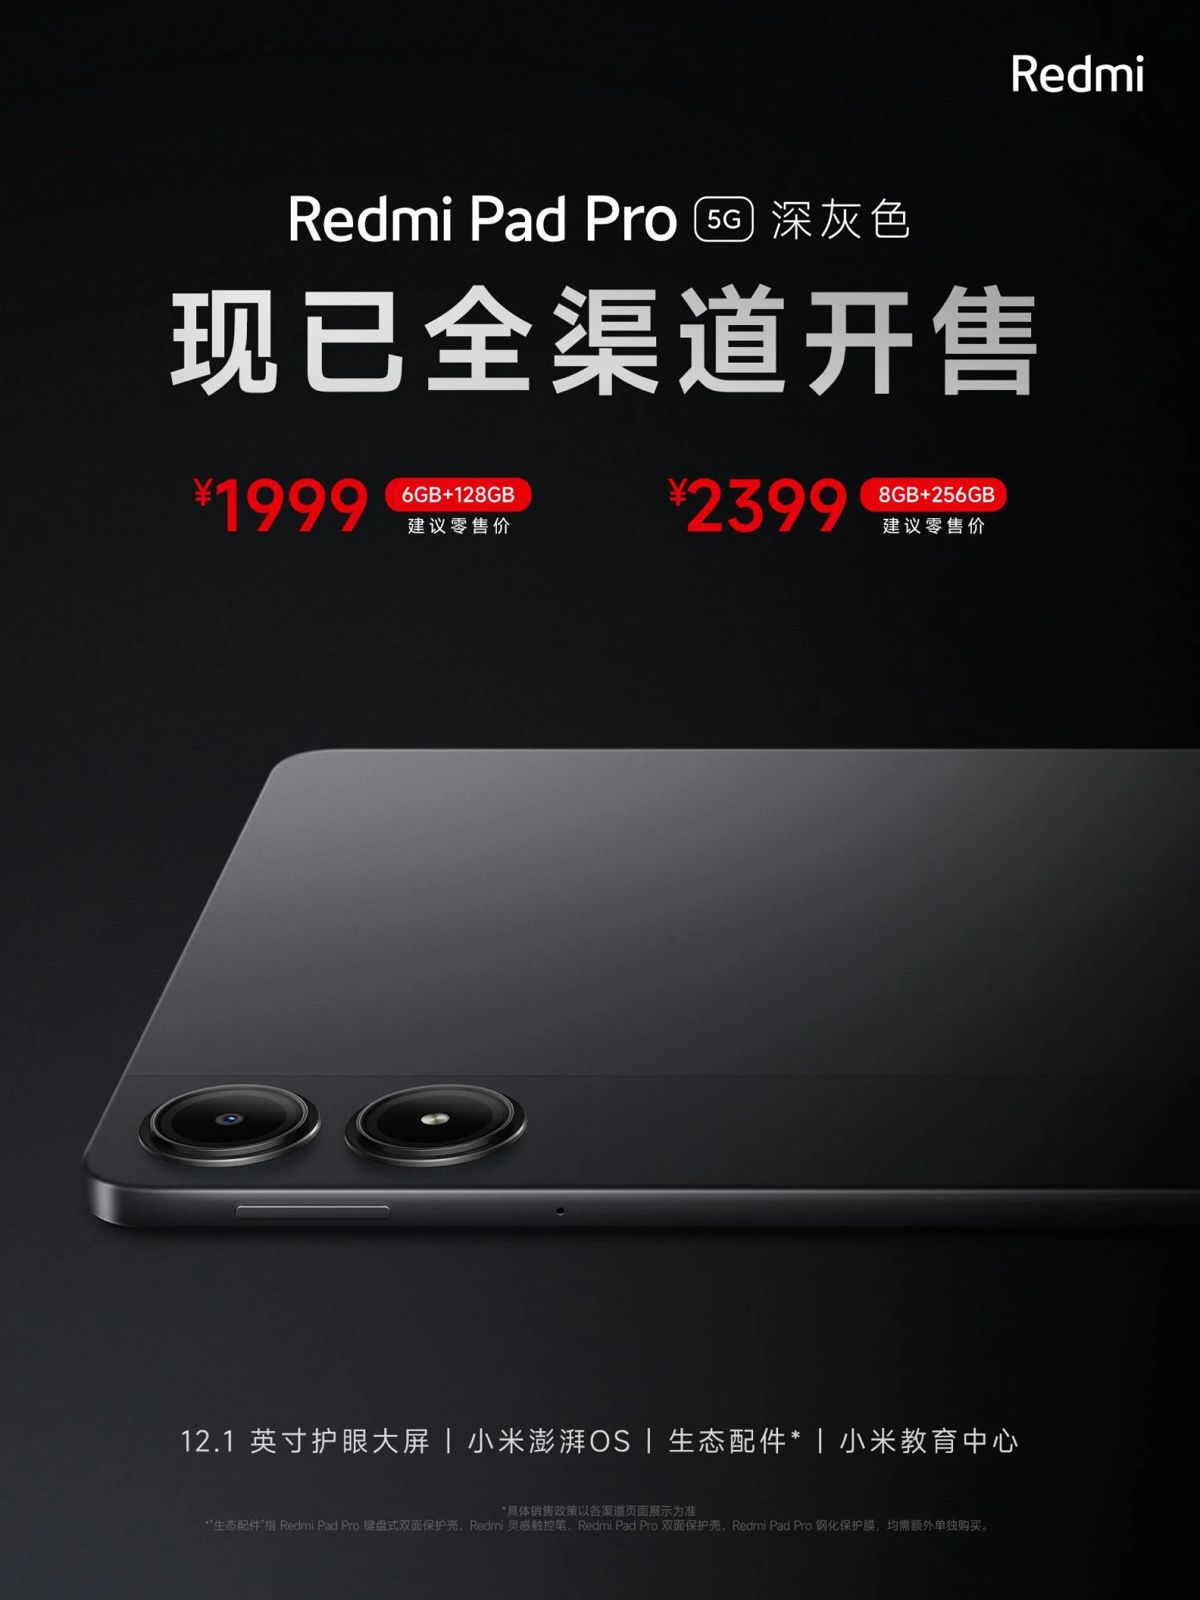 Powered by Snapdragon 7 Gen 2 processor with up to 8GB RAM and 256GB storage